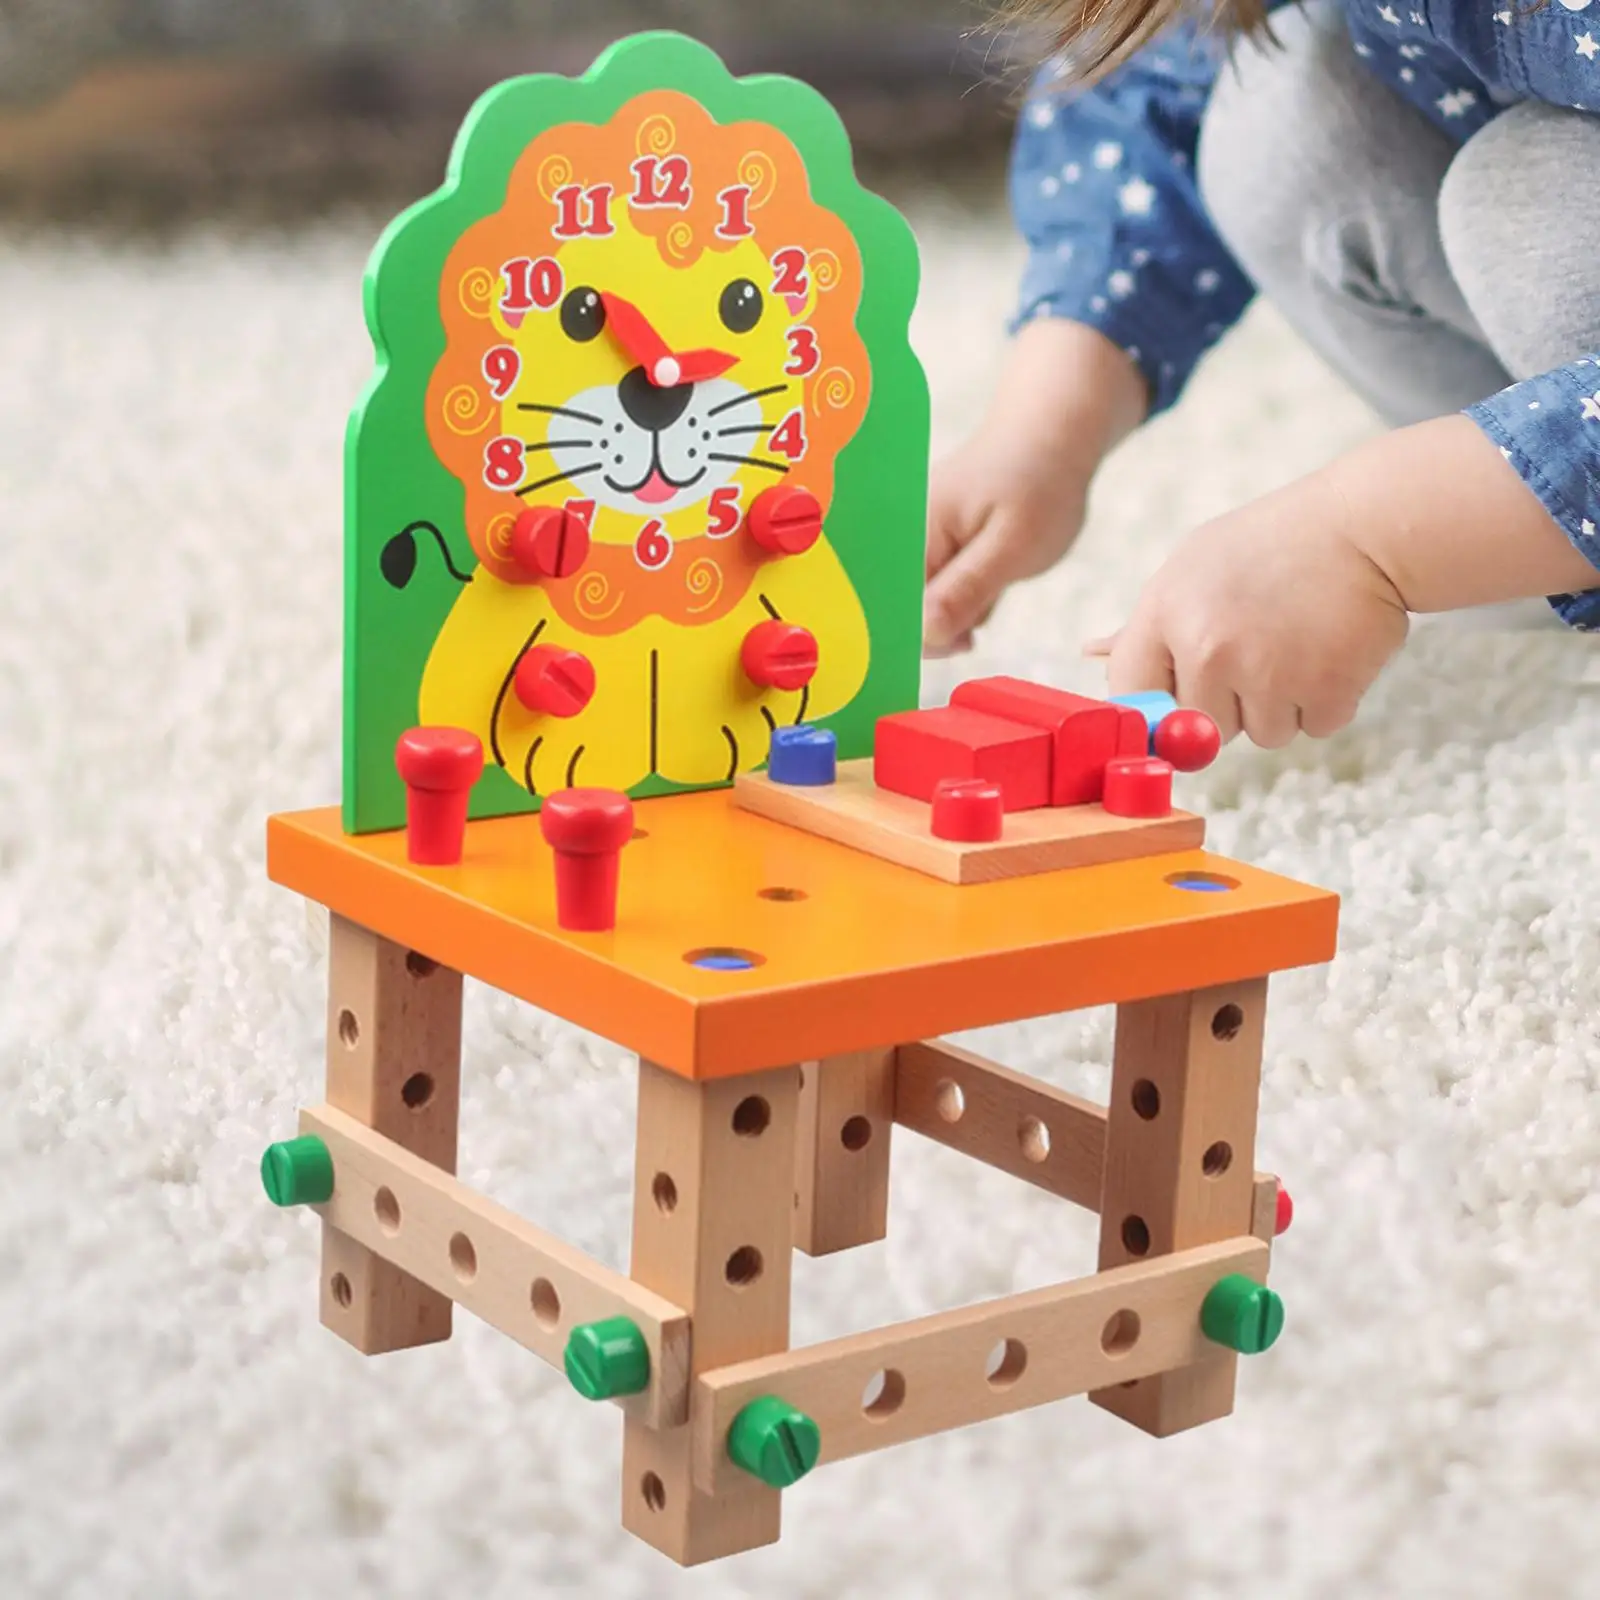 Wooden Assembling Chair Montessori Toys Educational Building Wooden Project Woodworking Kit for Toddler Birthday Gifts